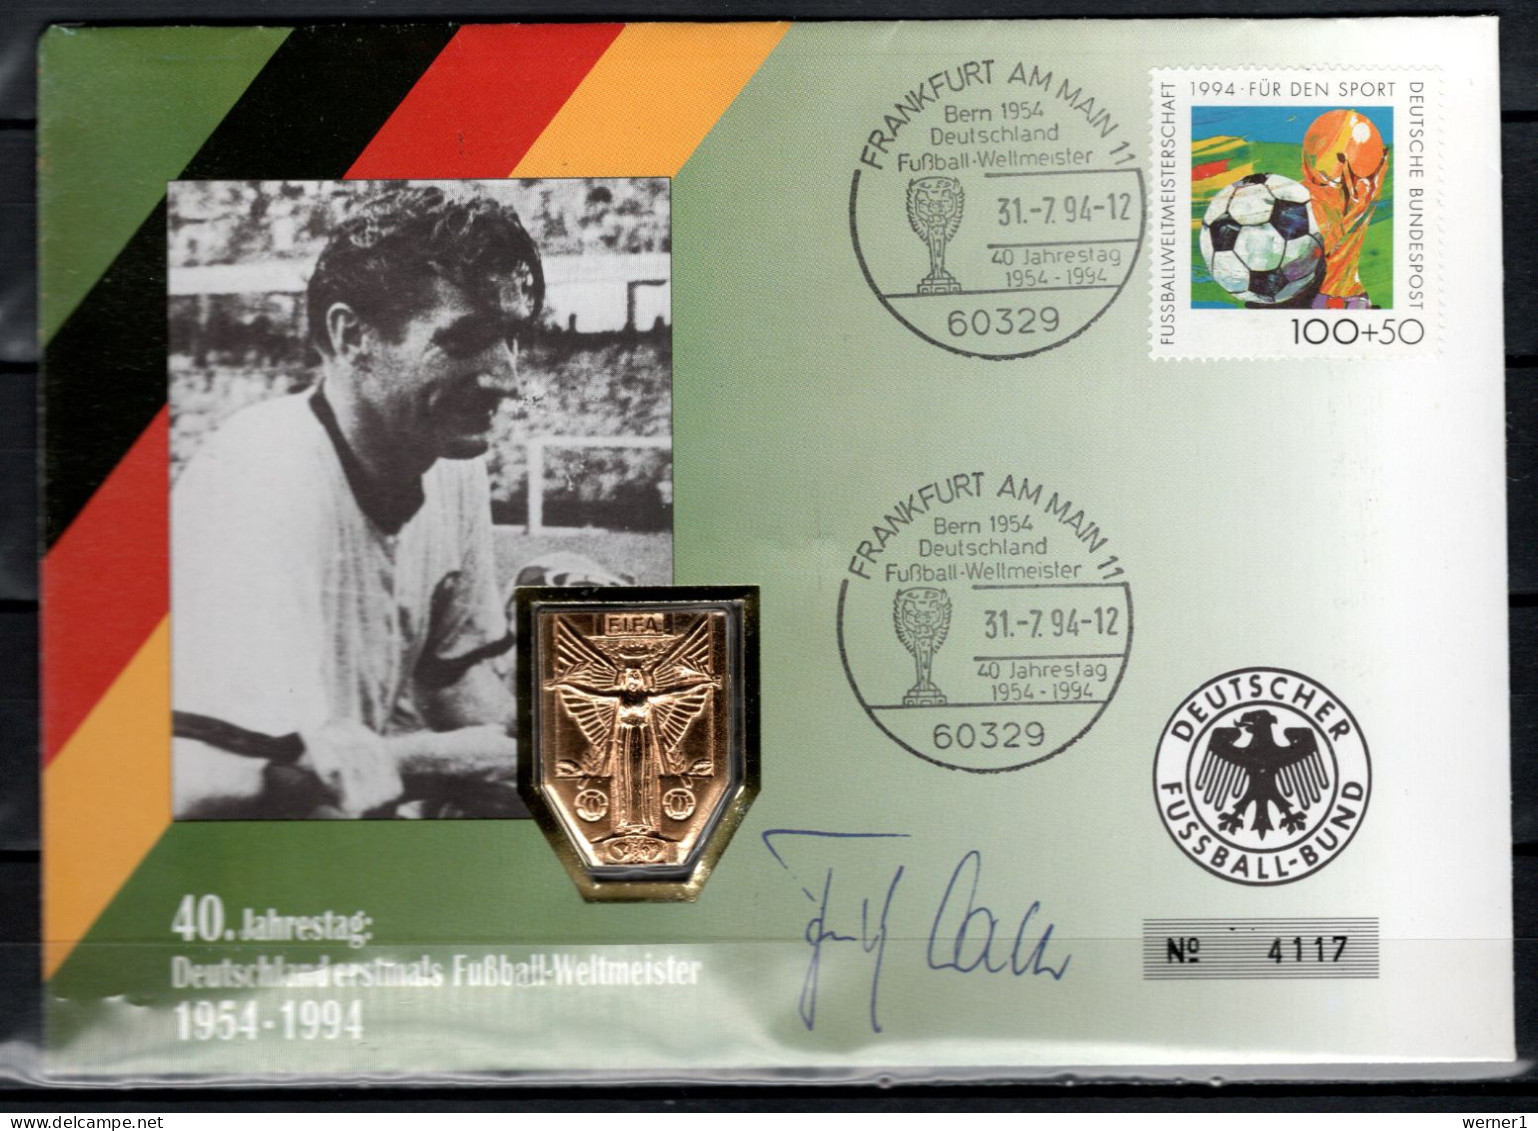 Germany 1994 Football Soccer World Cup Commemorative Cover With Medal And Original Signature Of Fritz Walter - 1994 – États-Unis